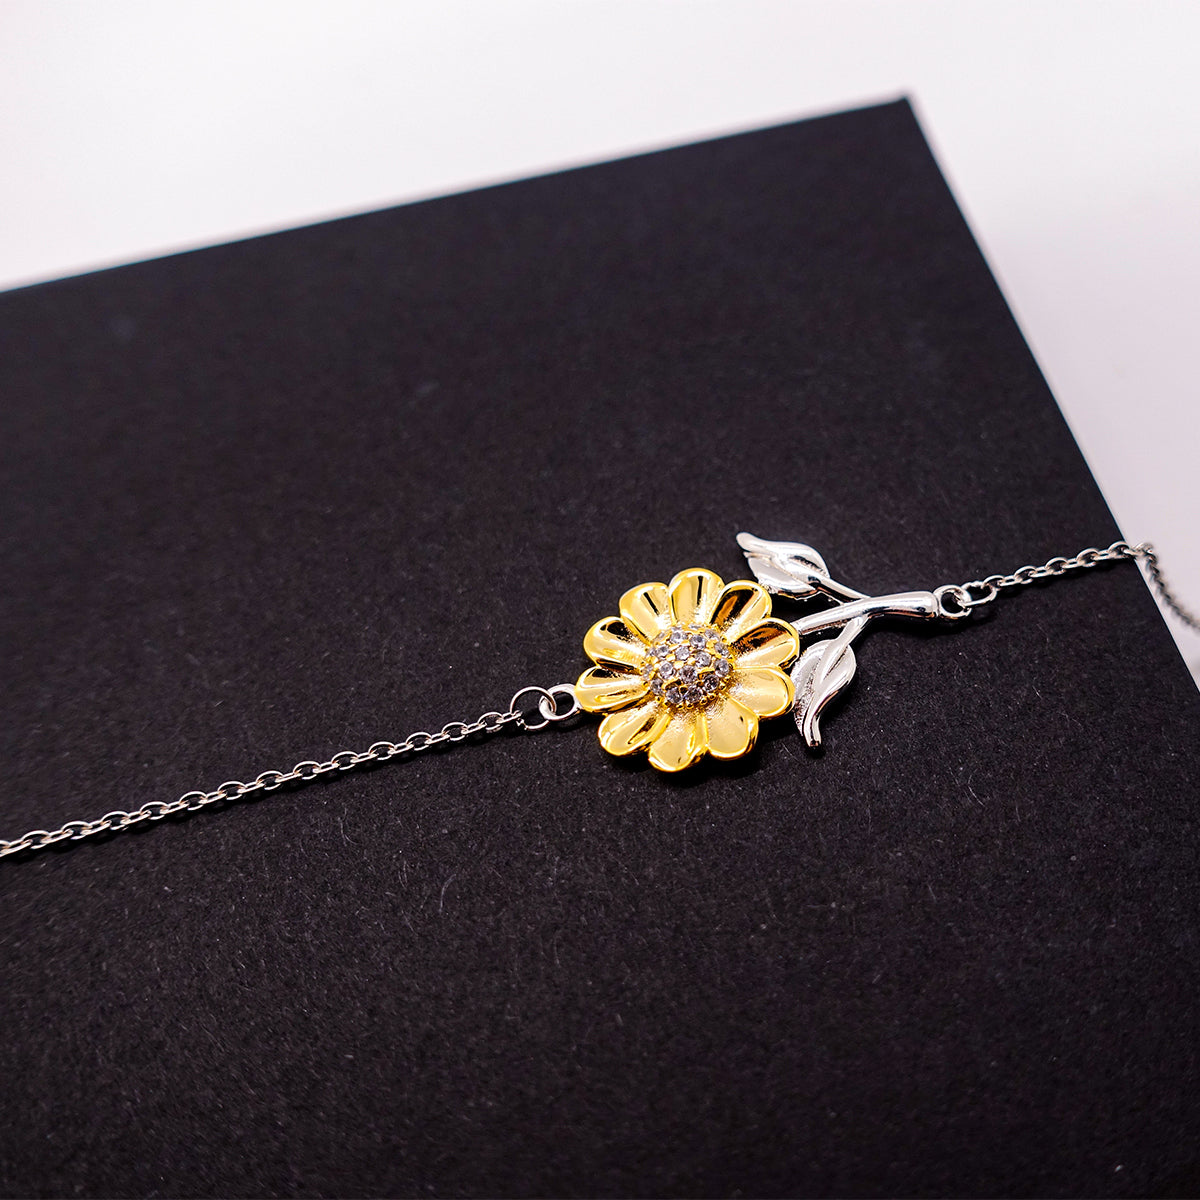 Unique Sunflower Bracelet Poppa Gift You Will Always Cherish - Inspirational Engraved Jewelry for Fathers Day, Birthday, Christmas, Graduation - Memorial Keepsake for Men - Meaningful Remembrance of Love and Hope